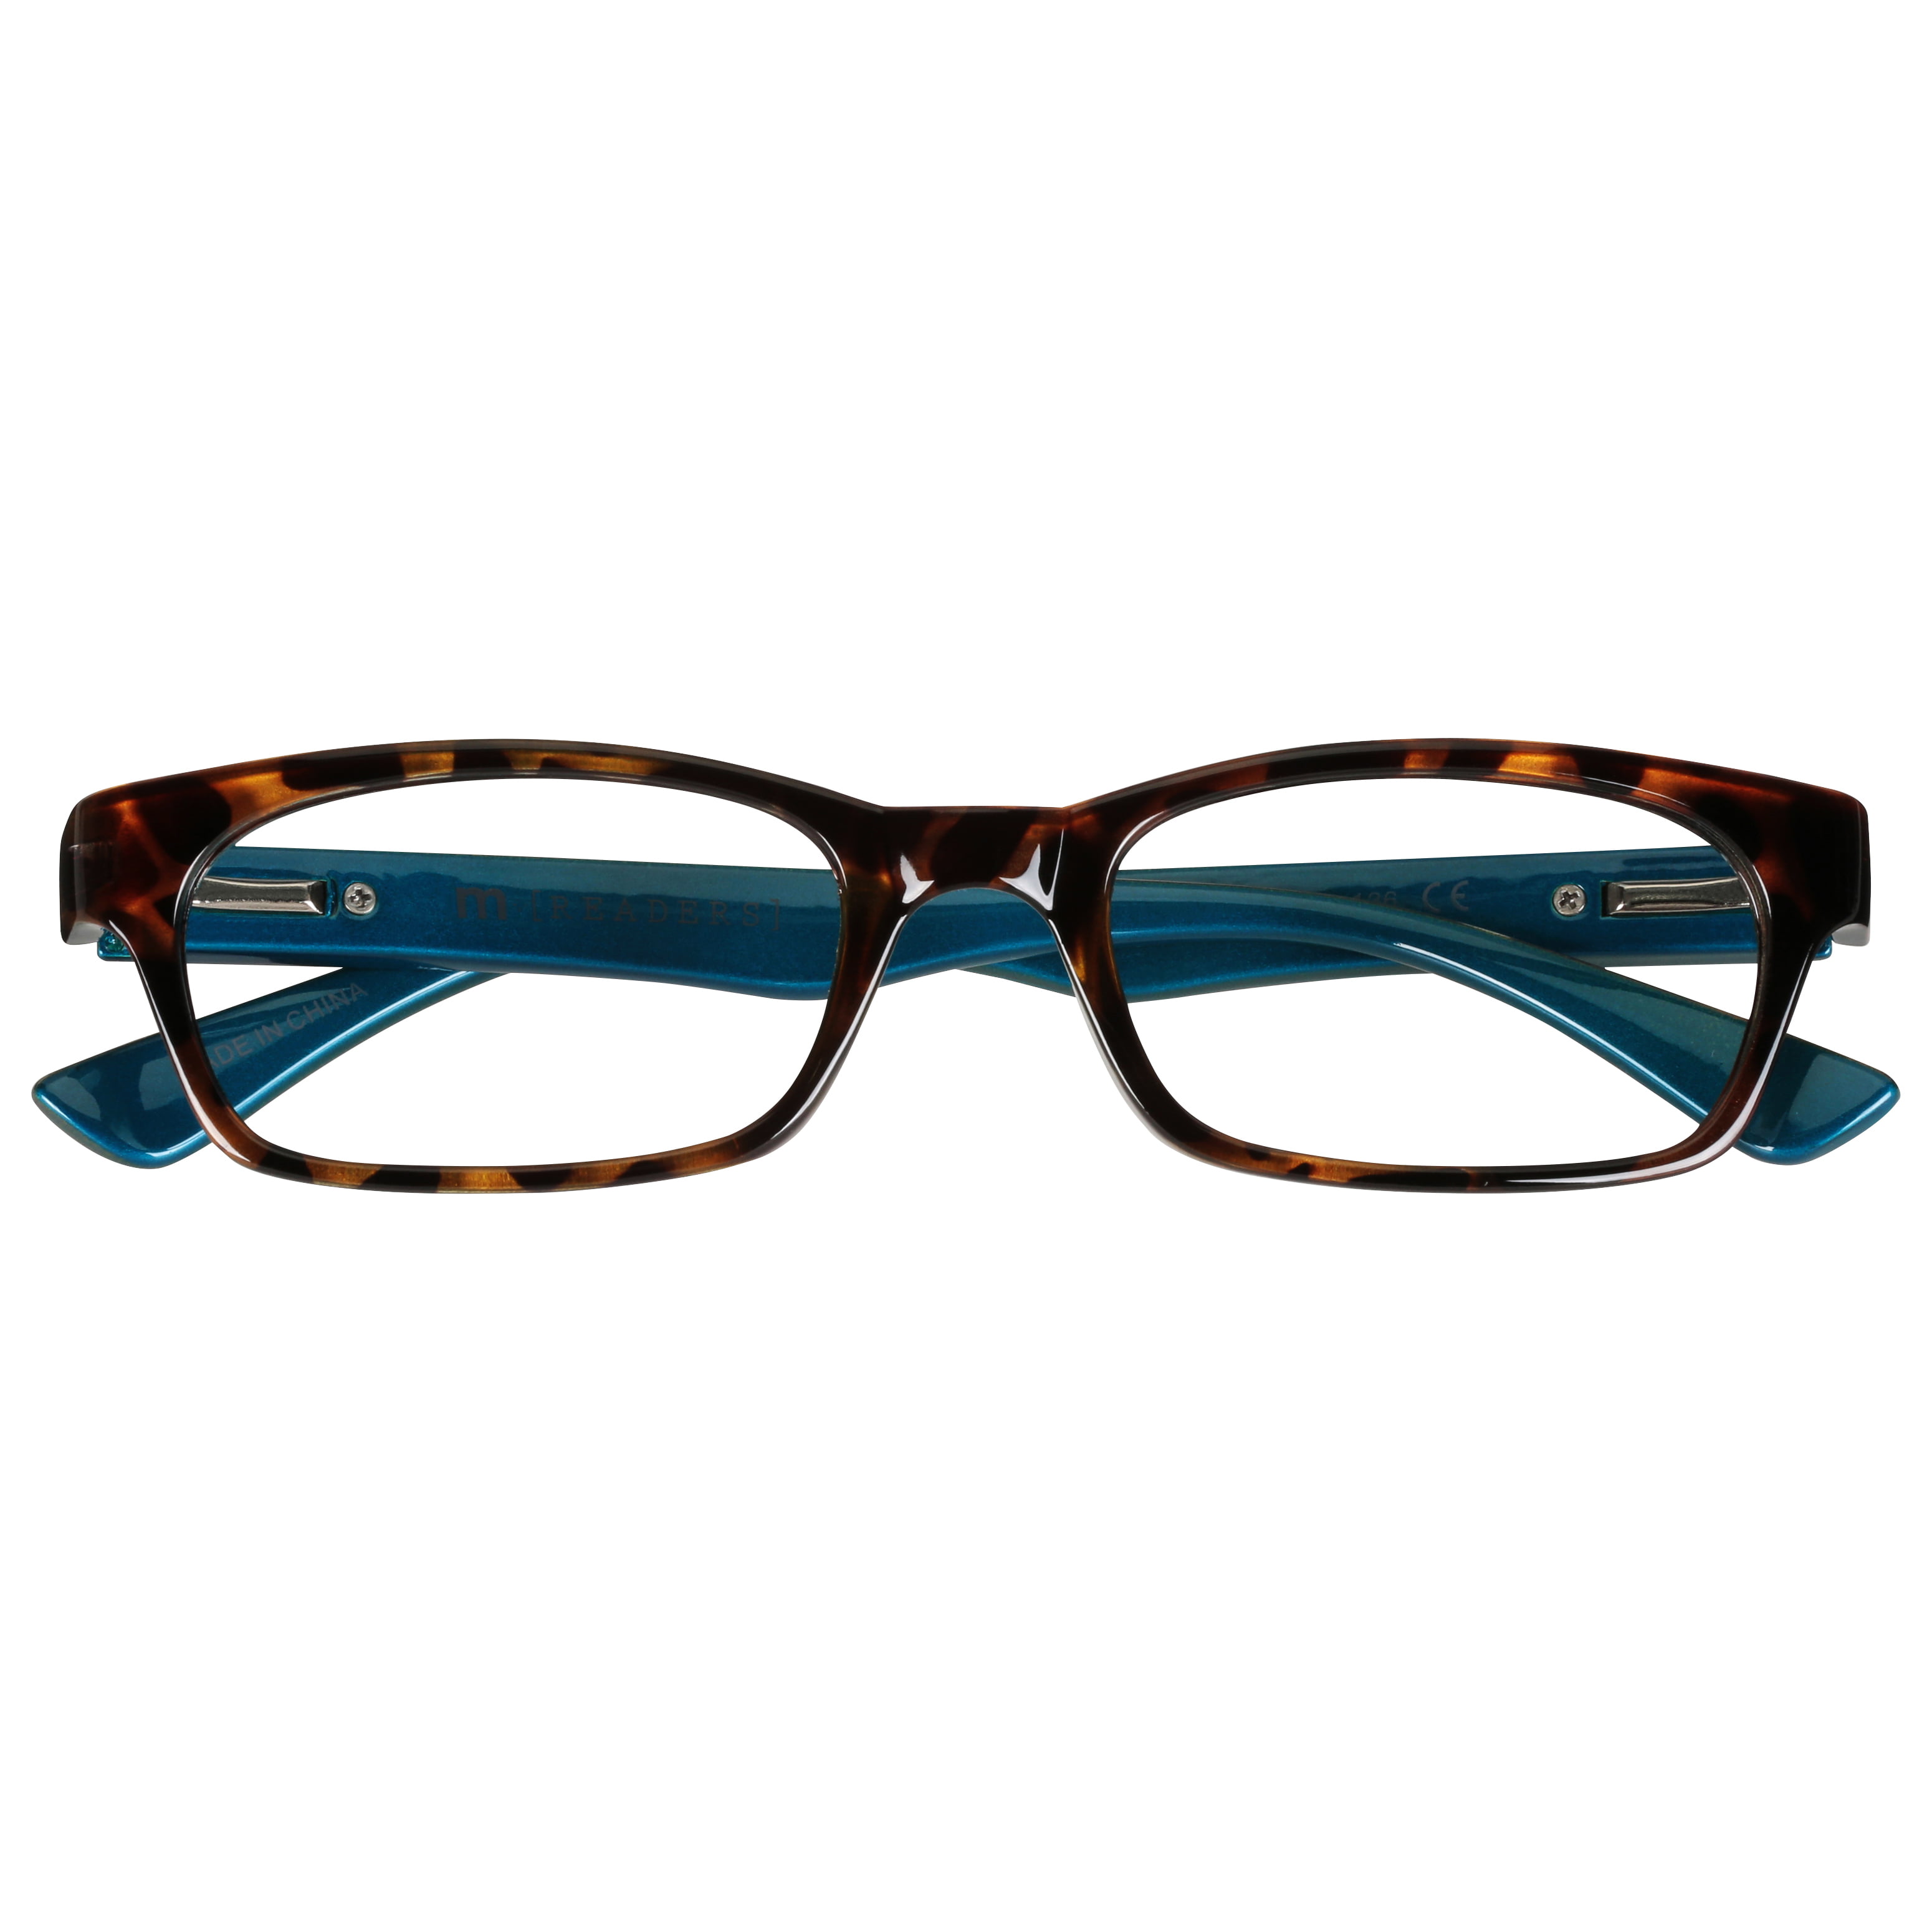 M+ Readers Color Tortoise with Inner Hinge Teal Plastic Tort Reading Glasses Womens 2.50 Spring in Colleen